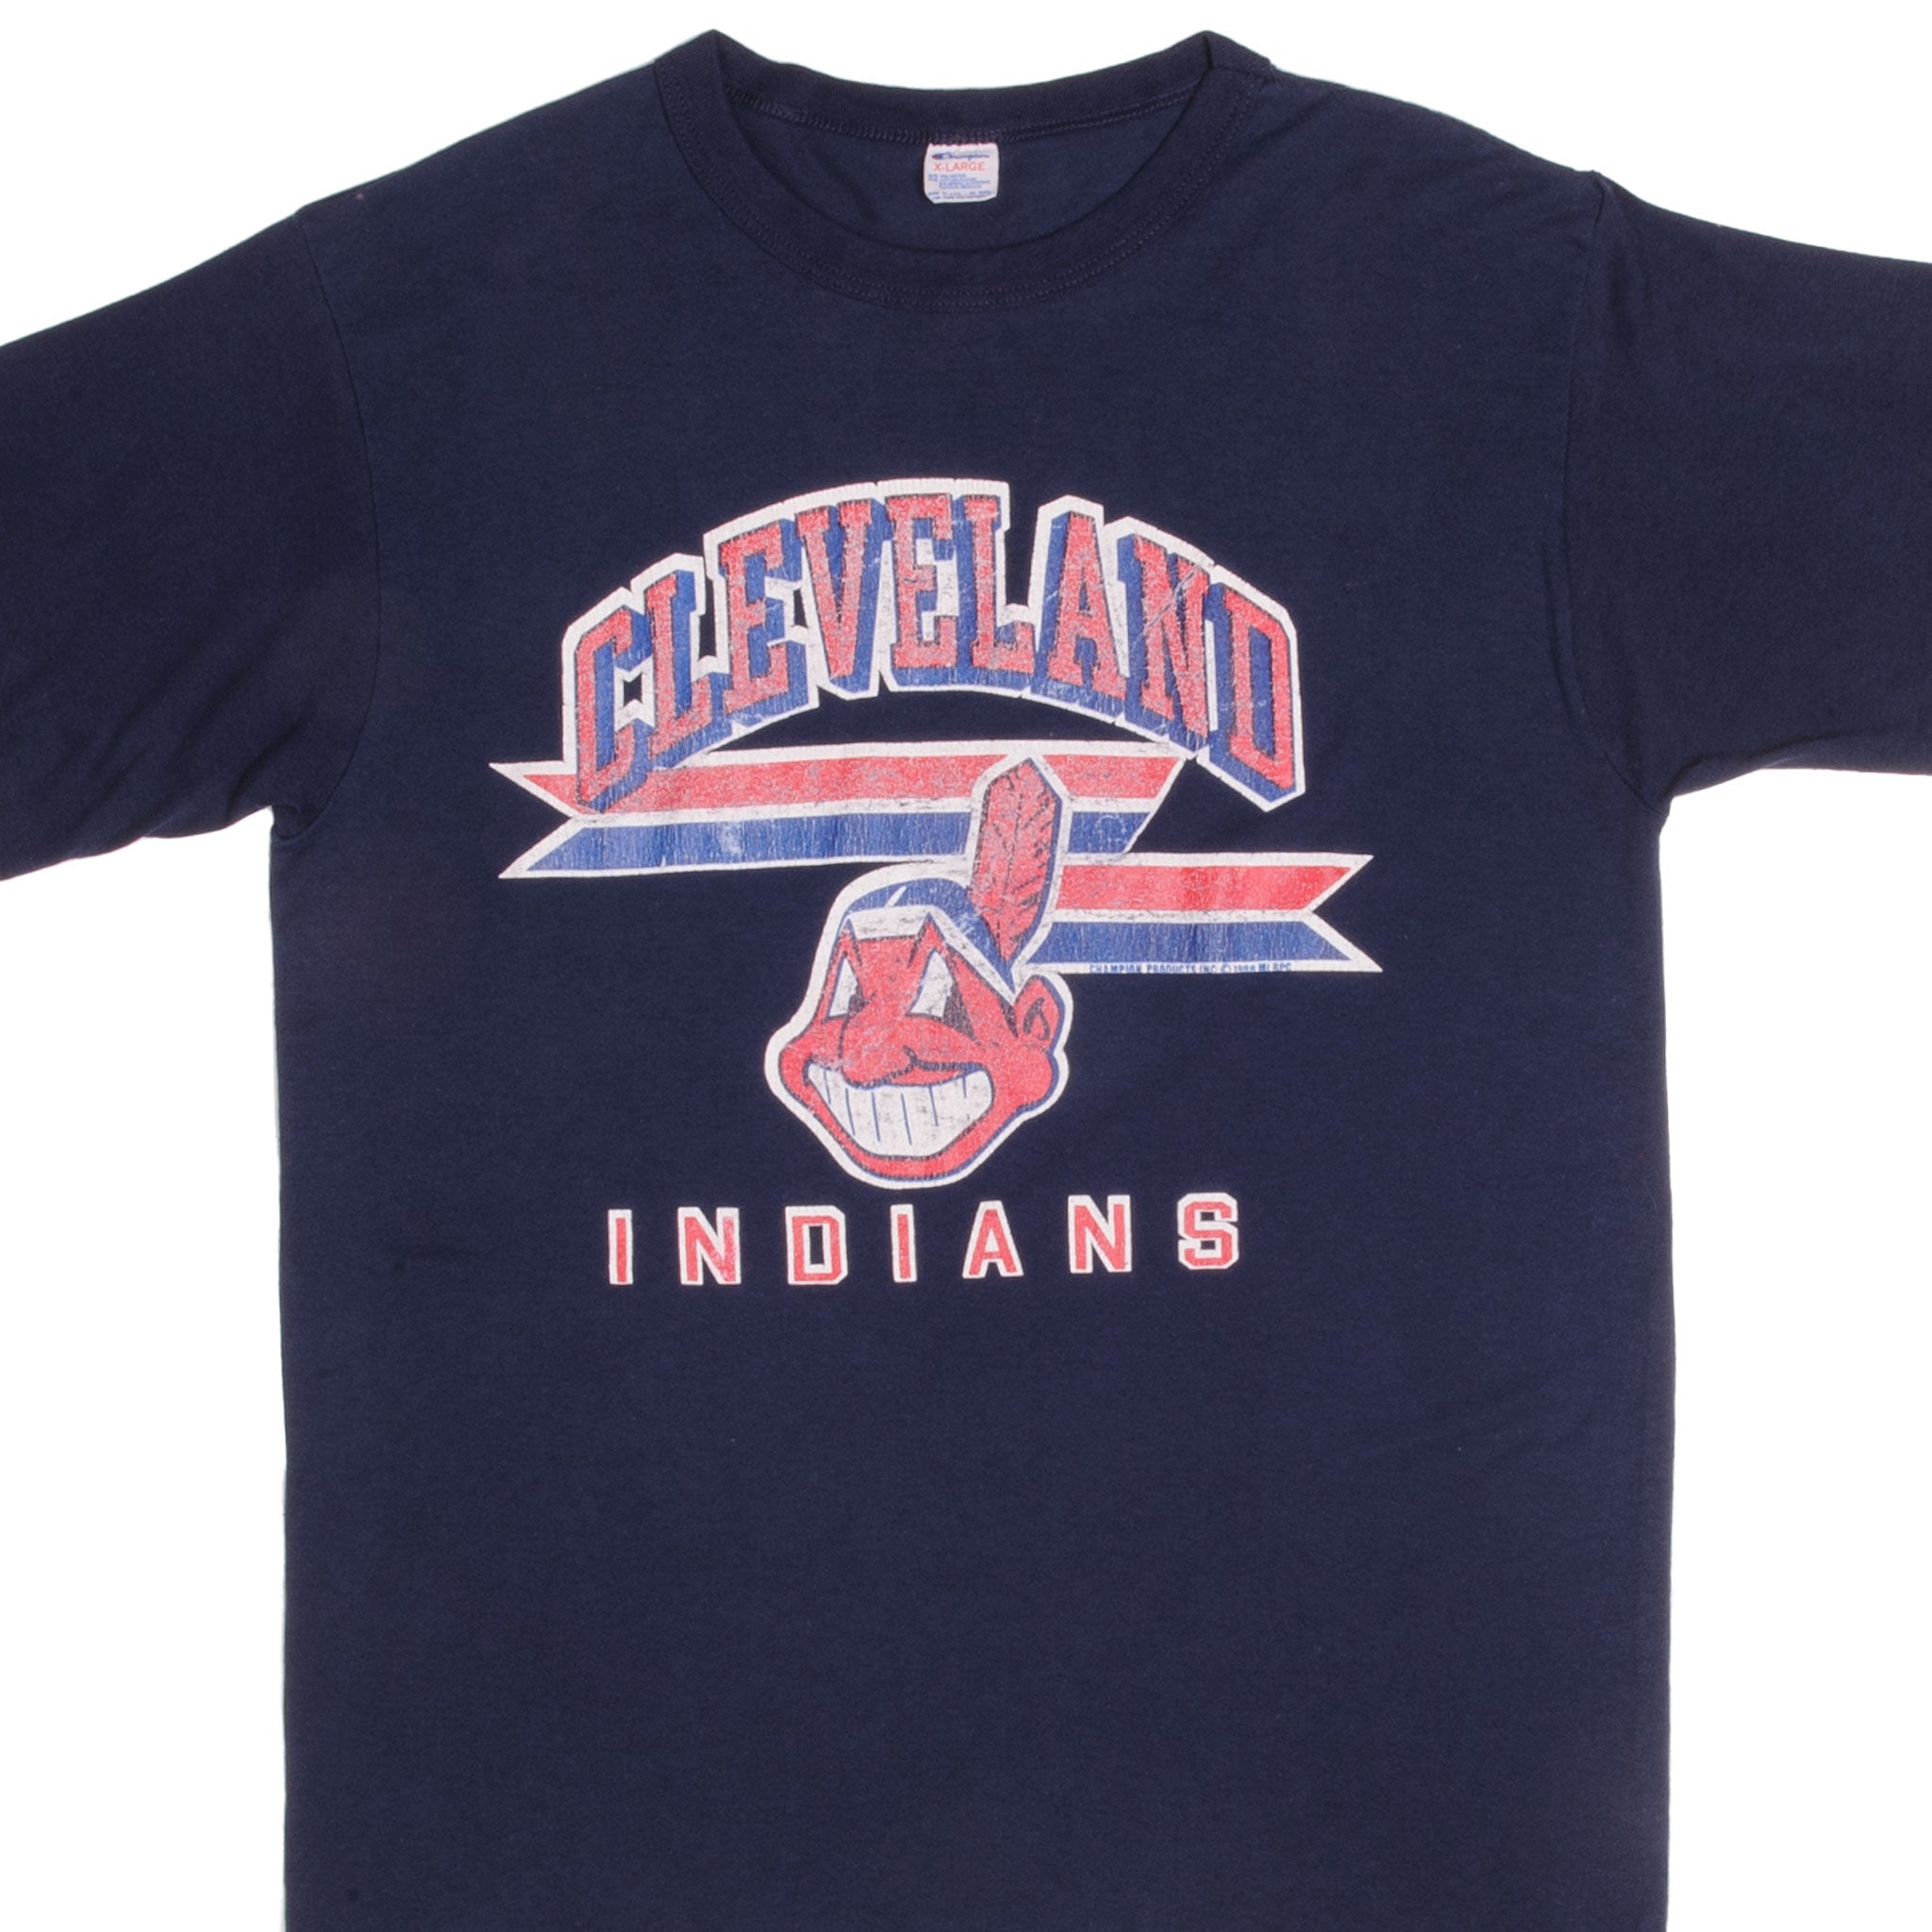 Get Cleveland indians champions retro shirt For Free Shipping